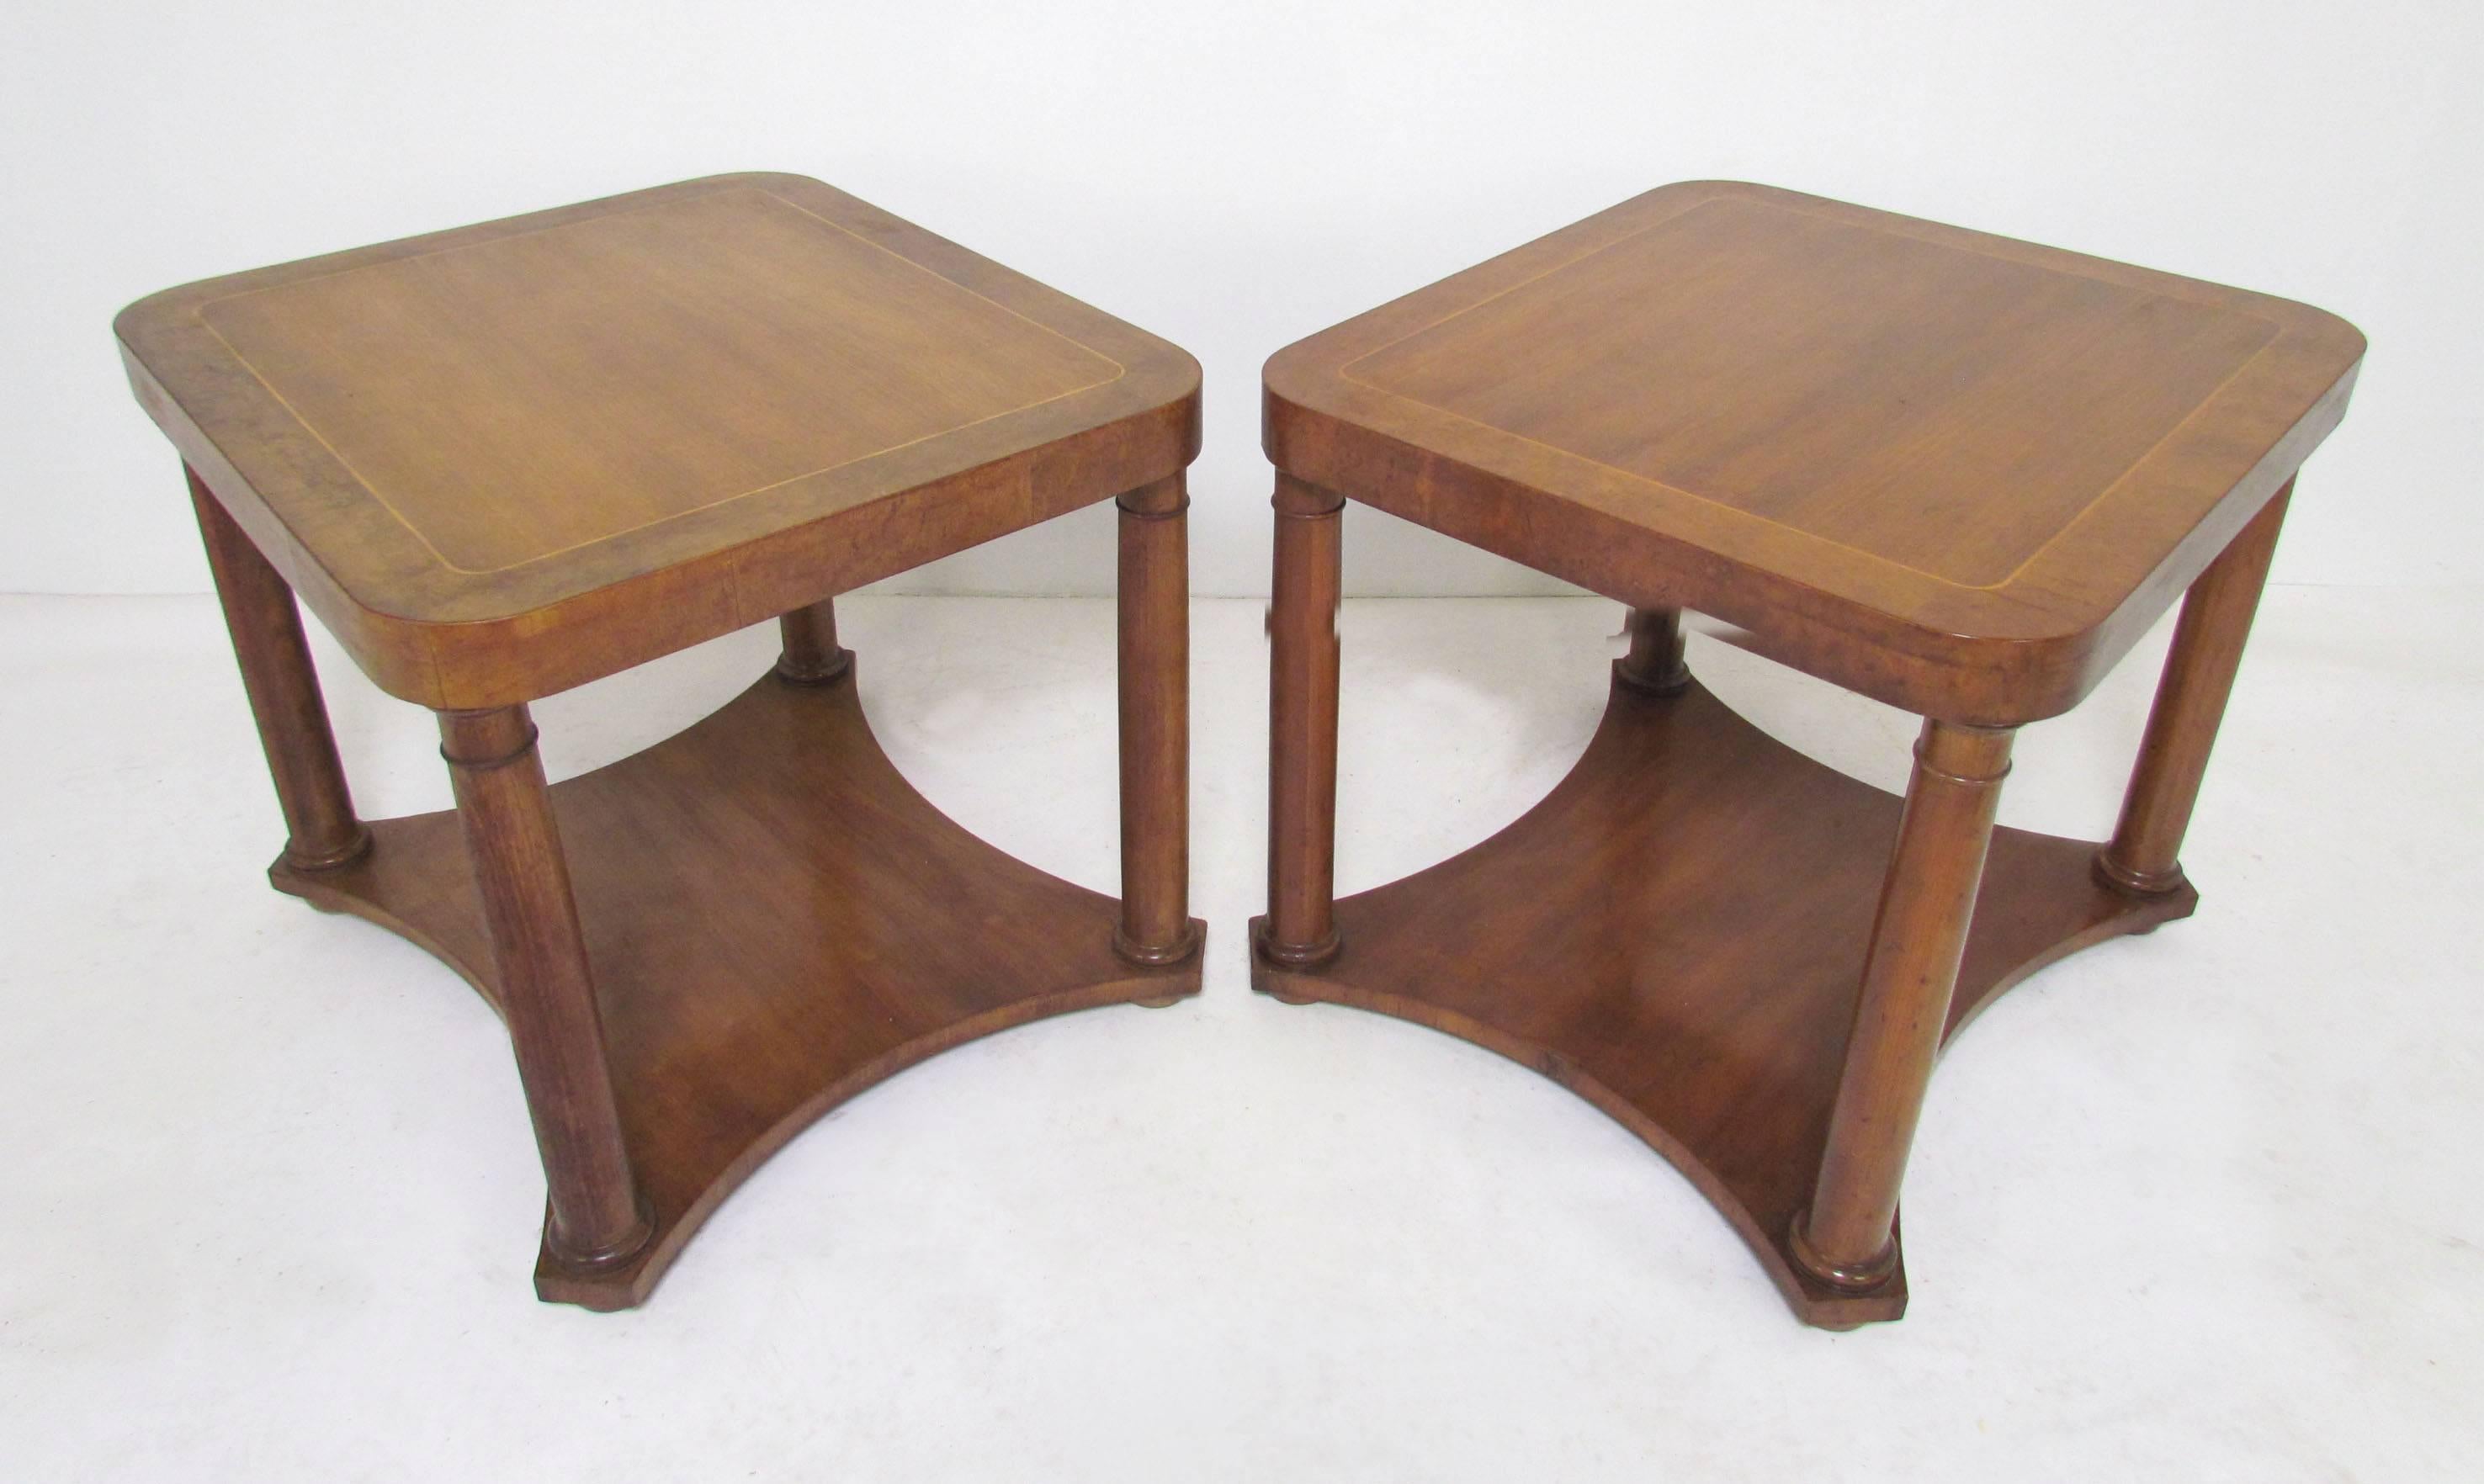 Pair of Minimalist columnar end tables in the Regency style by Baker Furniture in burl and walnut, circa 1960s.

Can be oriented as 27" wide (24" deep), or as 24" wide (27" deep.)